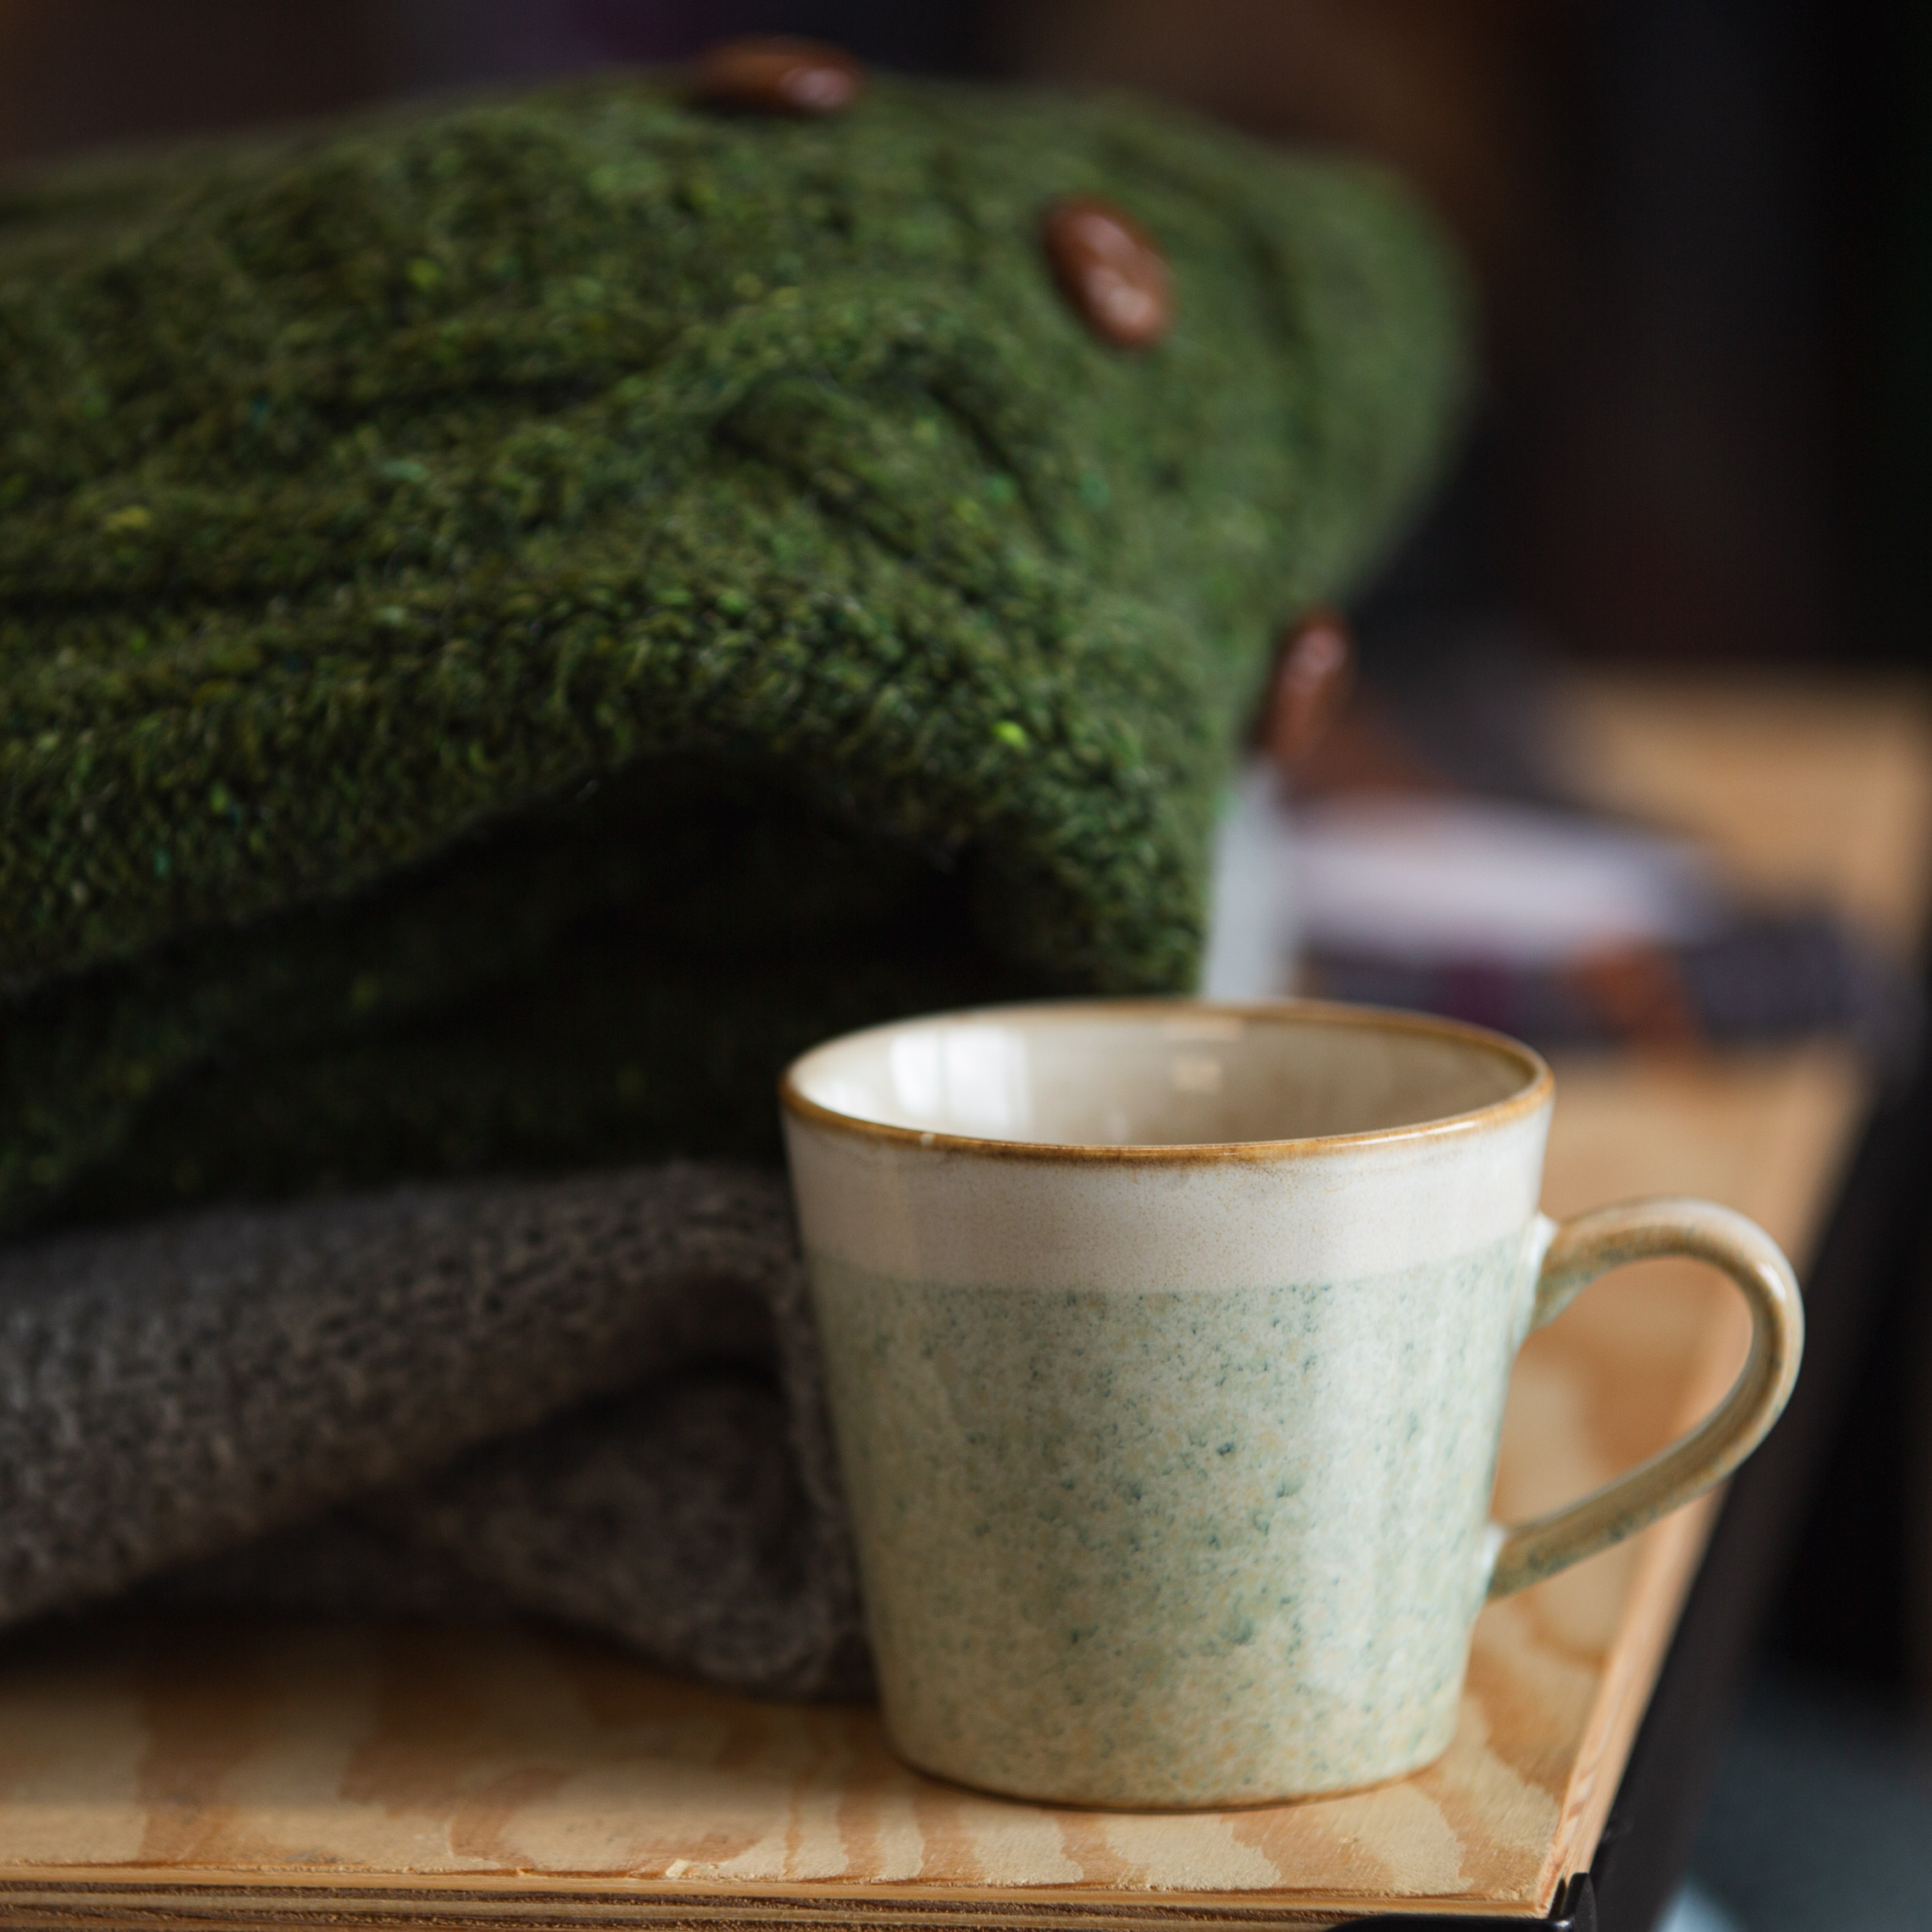 Cup next to knitted cardigan